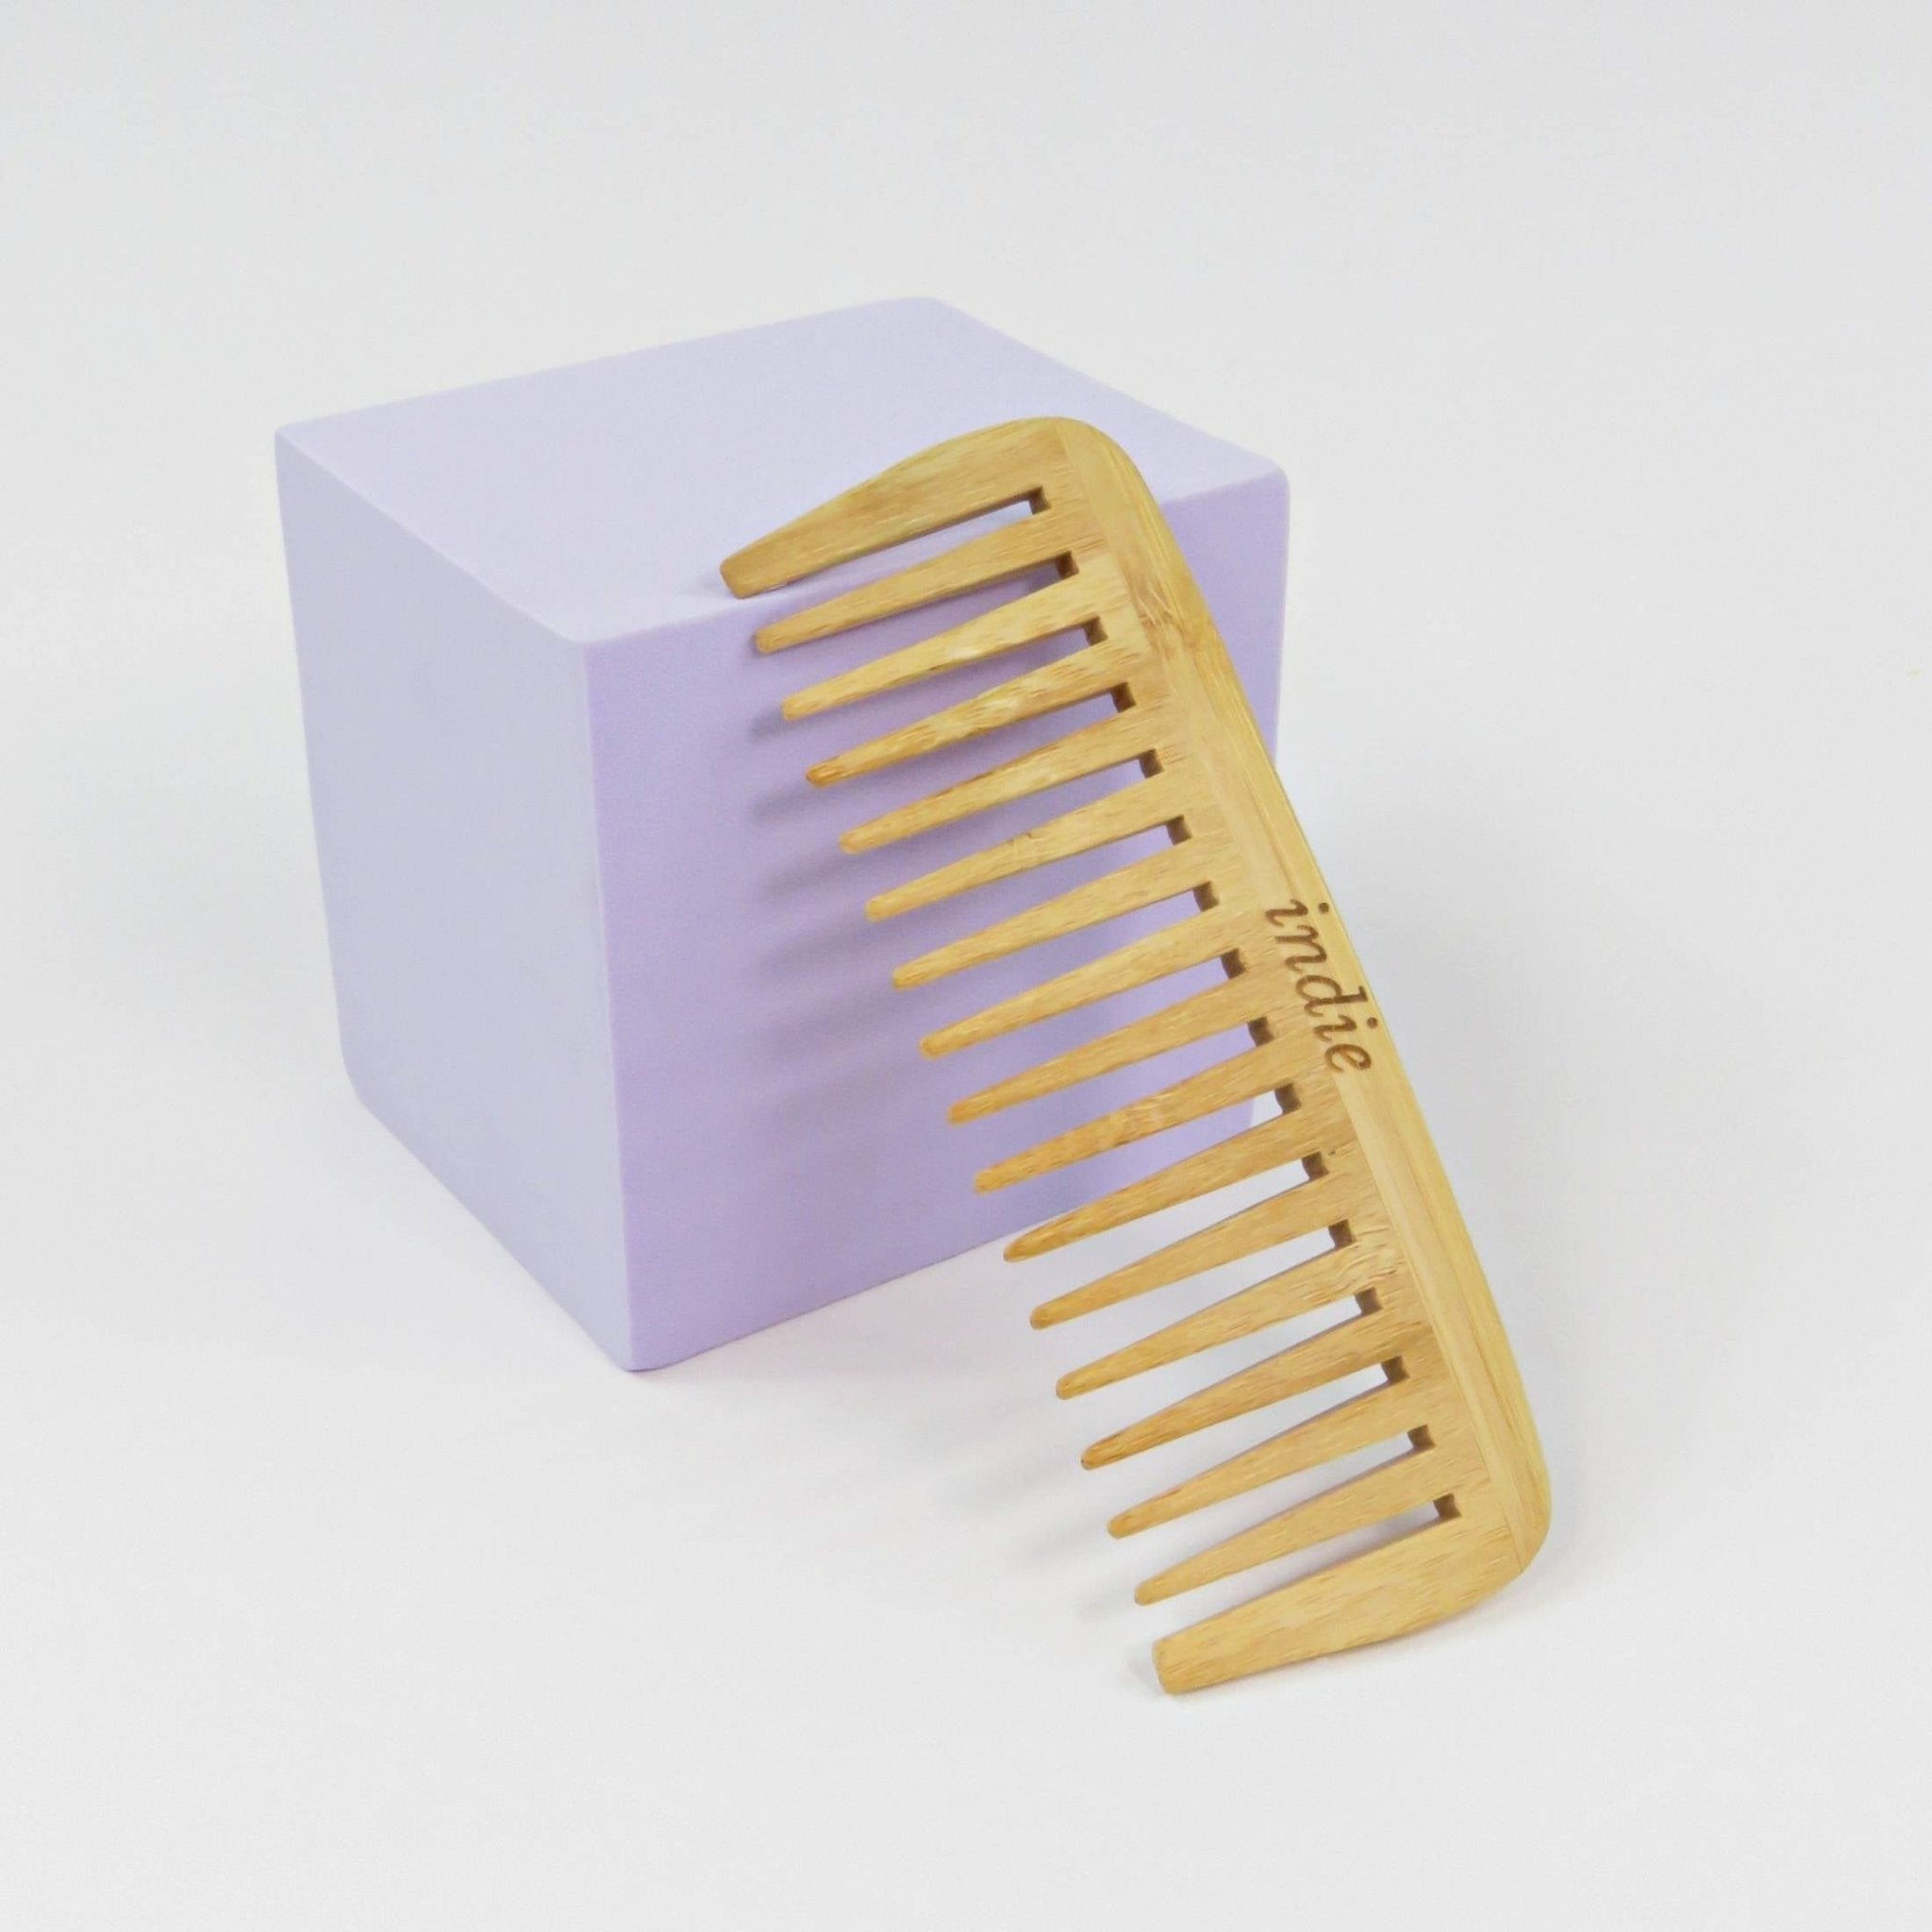 Product picture of Run Your Fingers Through My Hair Bamboo Comb